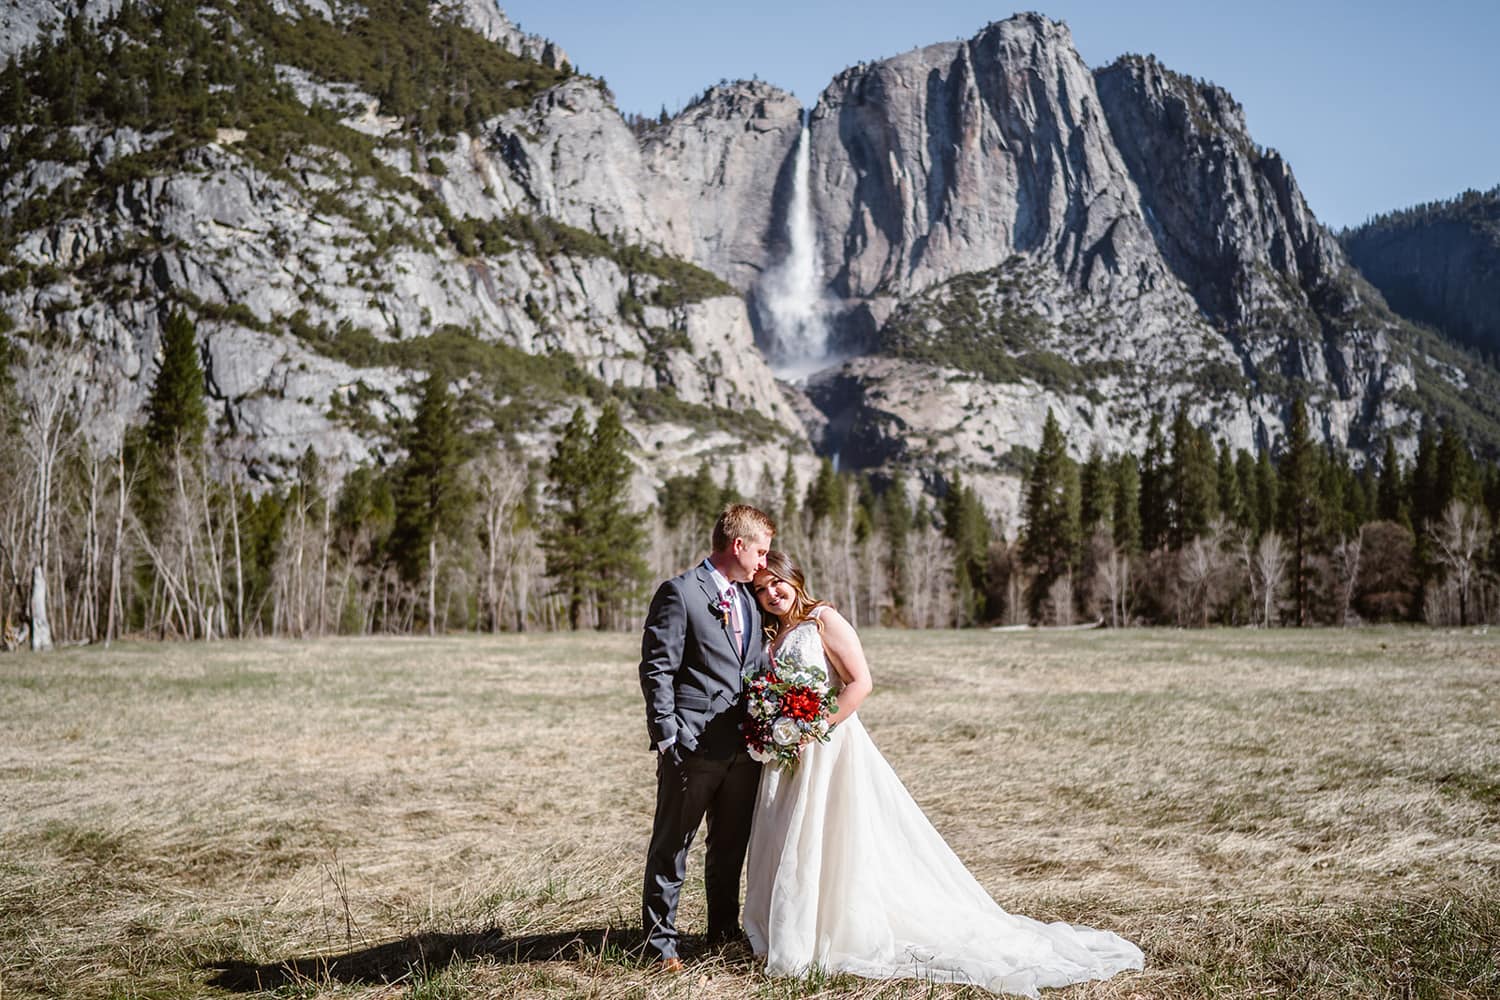 Couple standing in a field with Yosemite falls behind them on their elopement day in Yosemite.